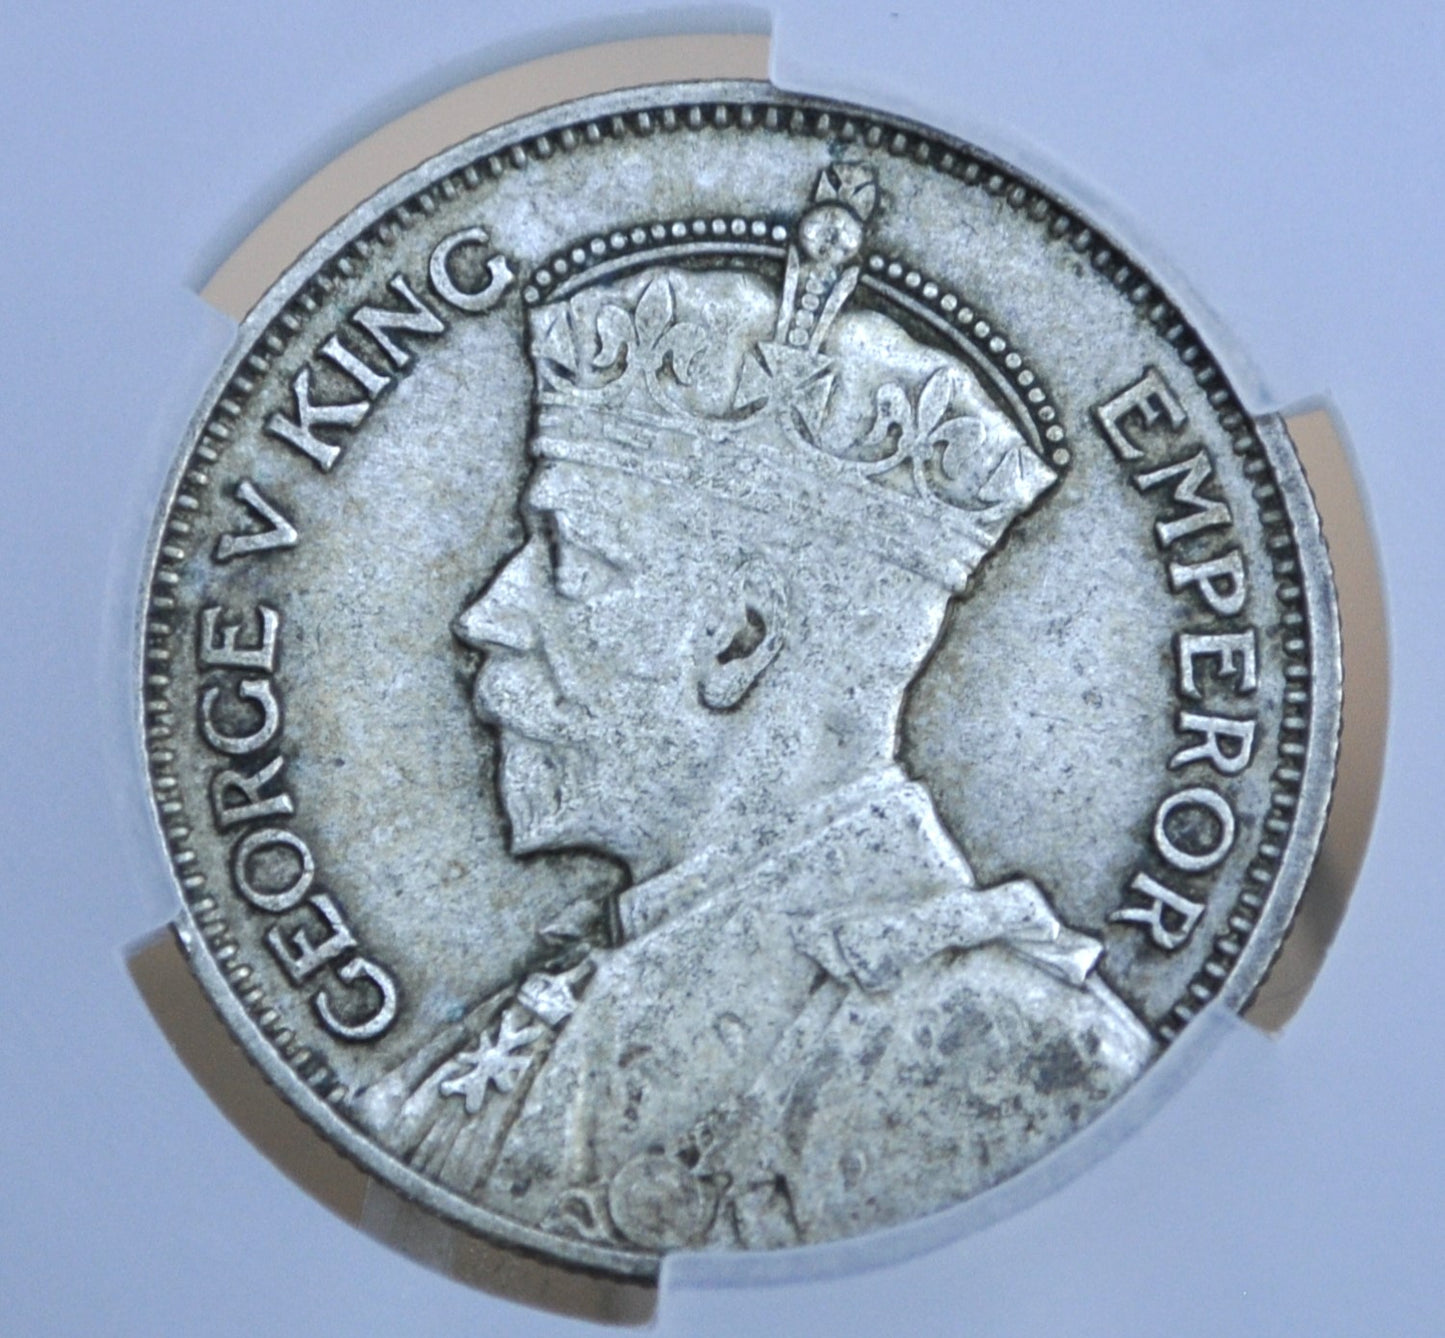 1934 New Zealand Silver Shilling - Great Condition, XF+ - 50% Silver - 1934 New Zealand One Shilling